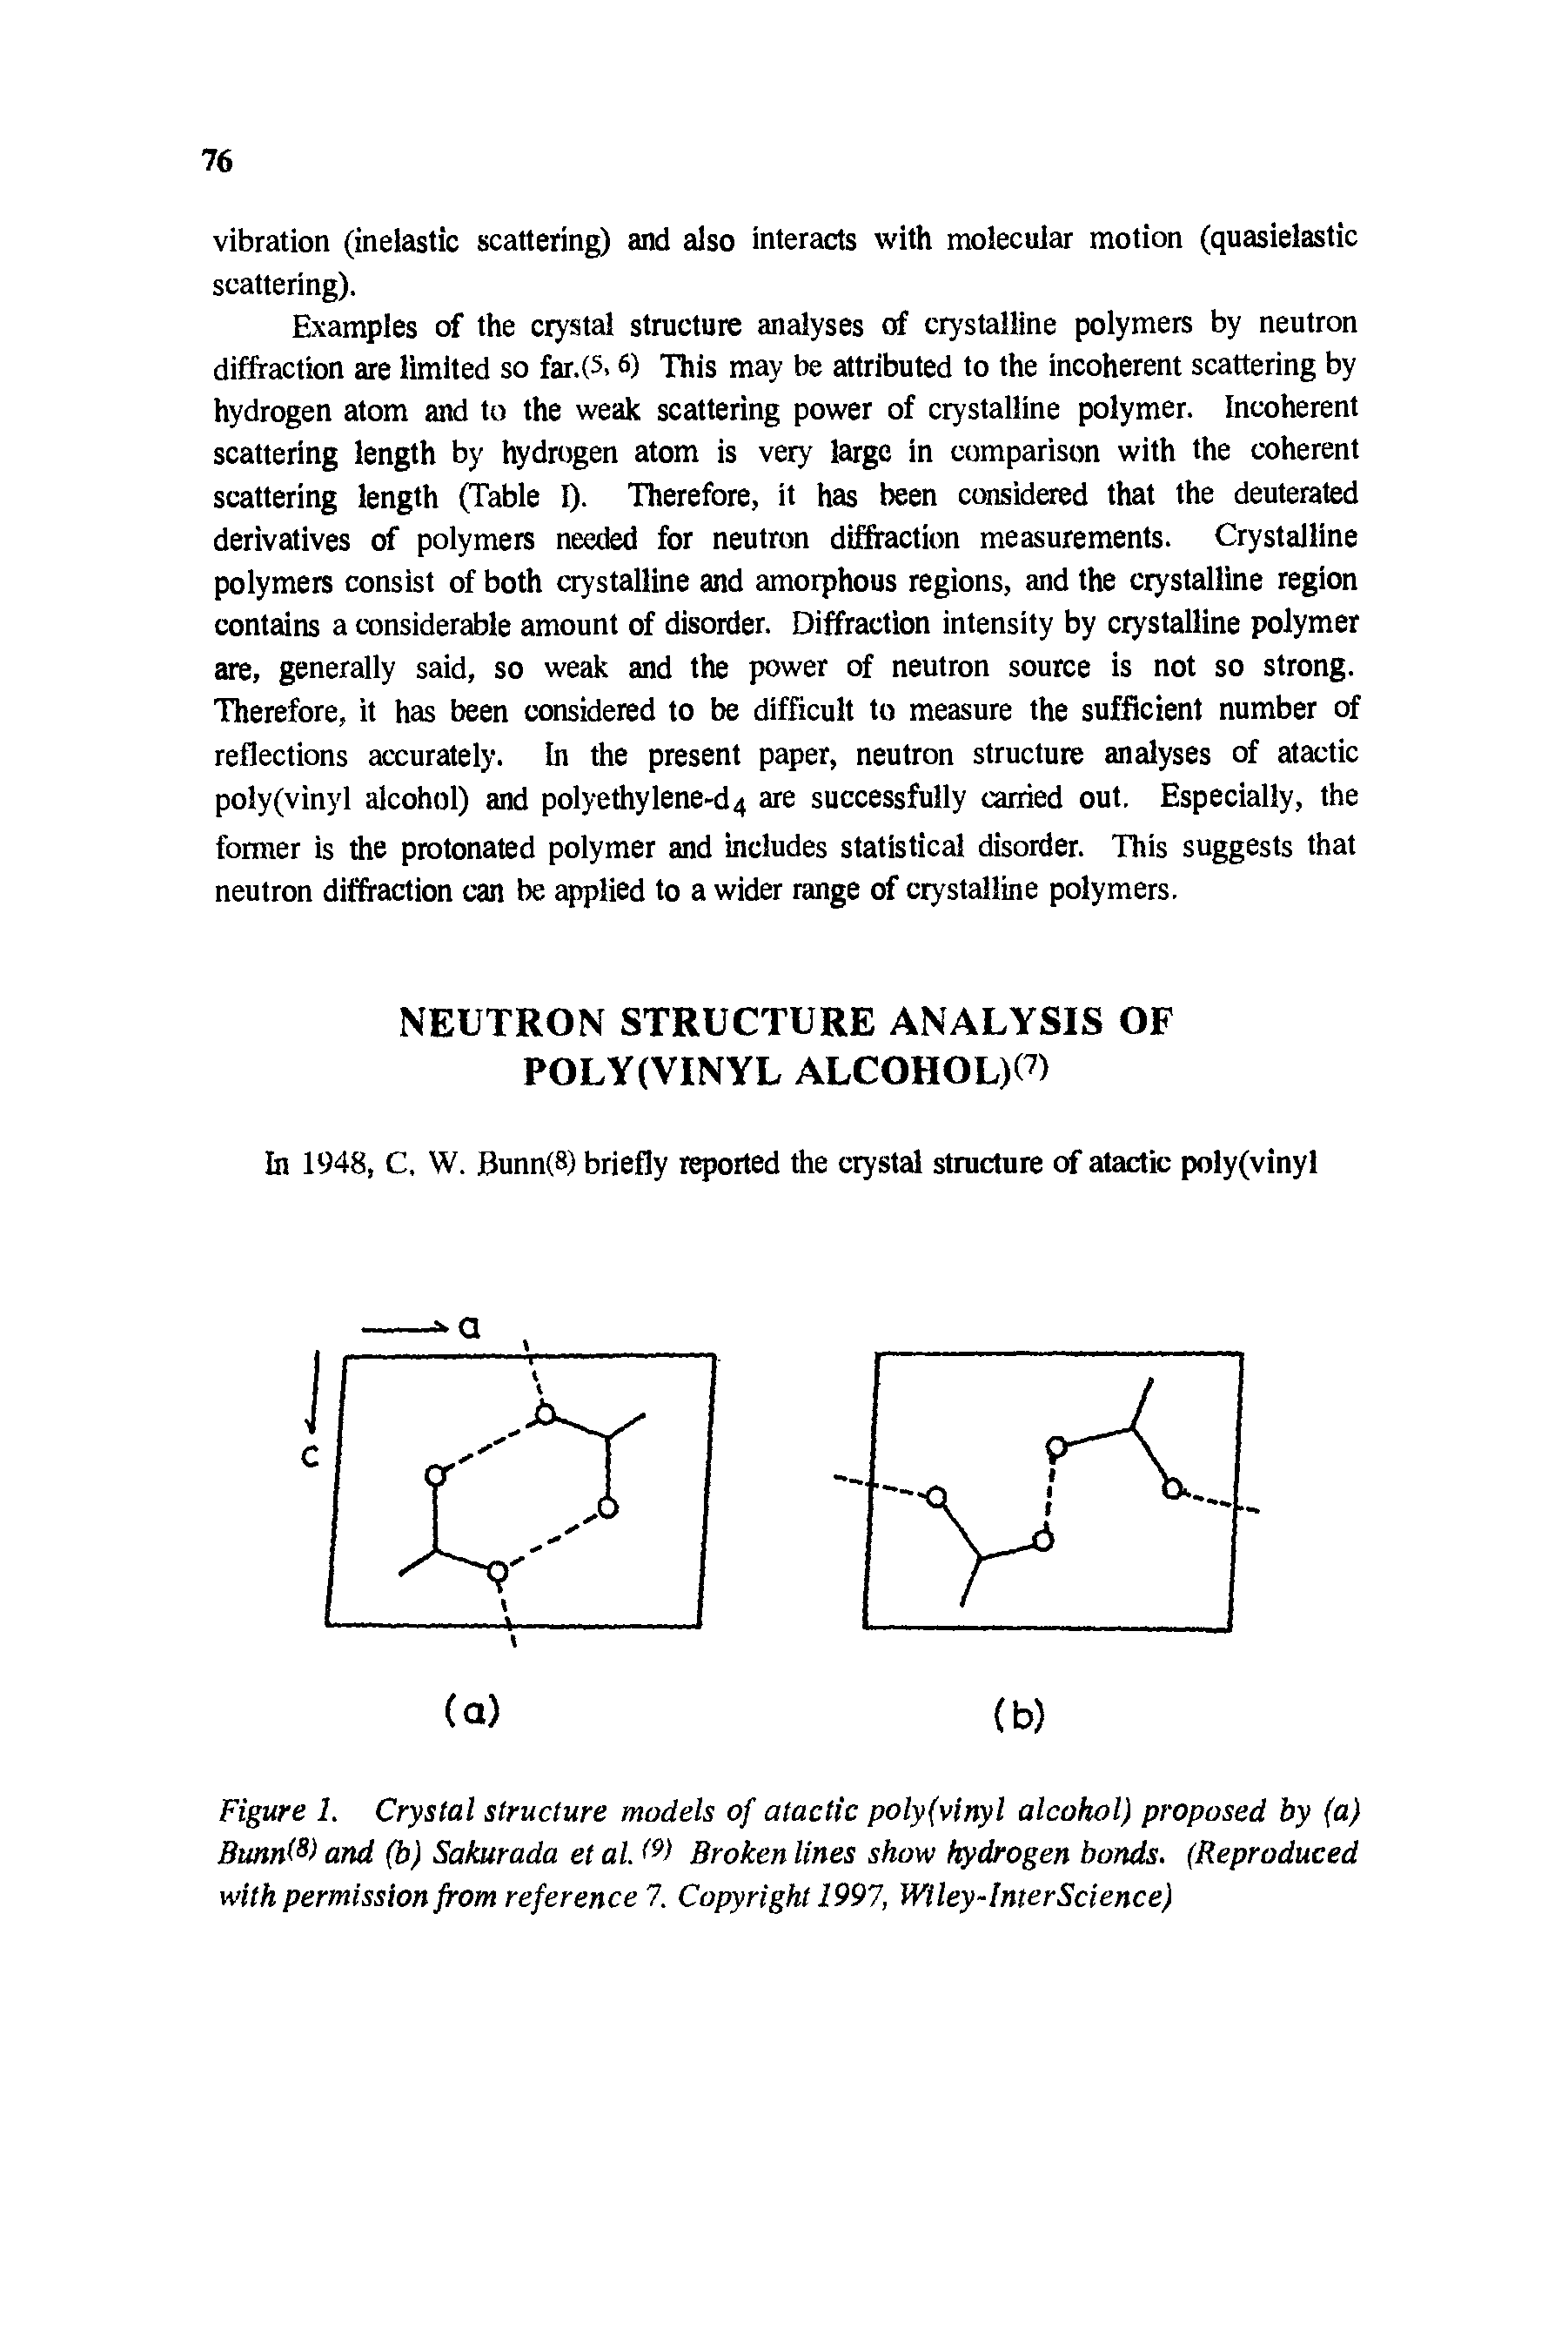 Figure I. Crystal structure models of atactic poly(vinyl alcohol) proposed by (a) Bunn( ) and (b) Sakurada et al. W Broken lines show hydrogen bonds. (Reproduced with permission from reference 7. Copyright 1997, Wiley-InterScience)...